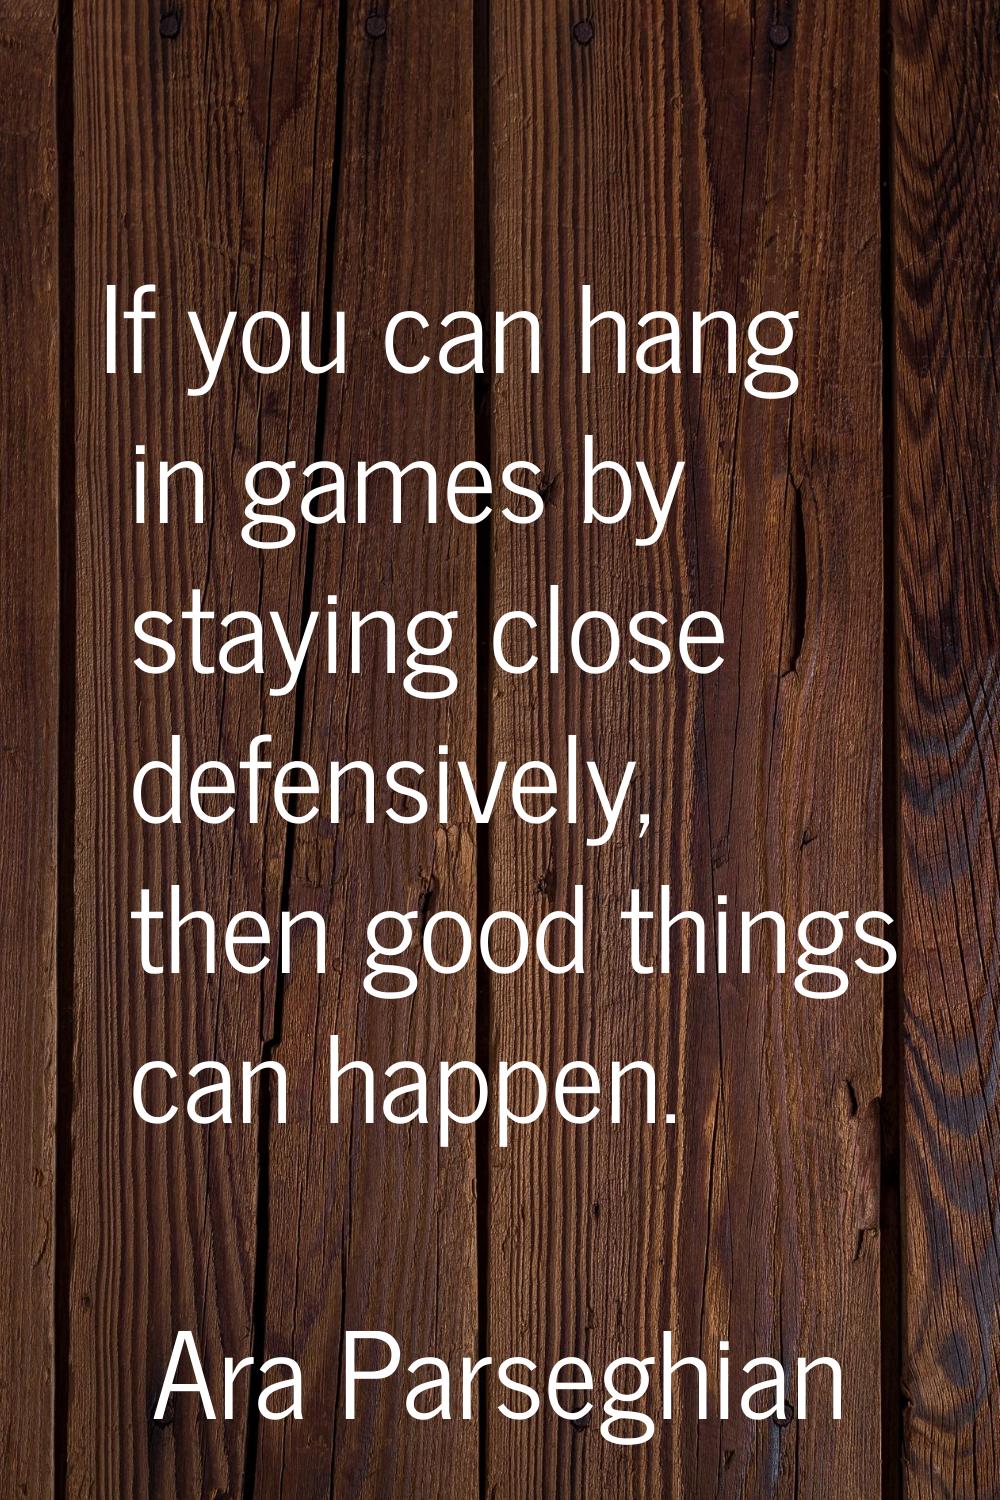 If you can hang in games by staying close defensively, then good things can happen.